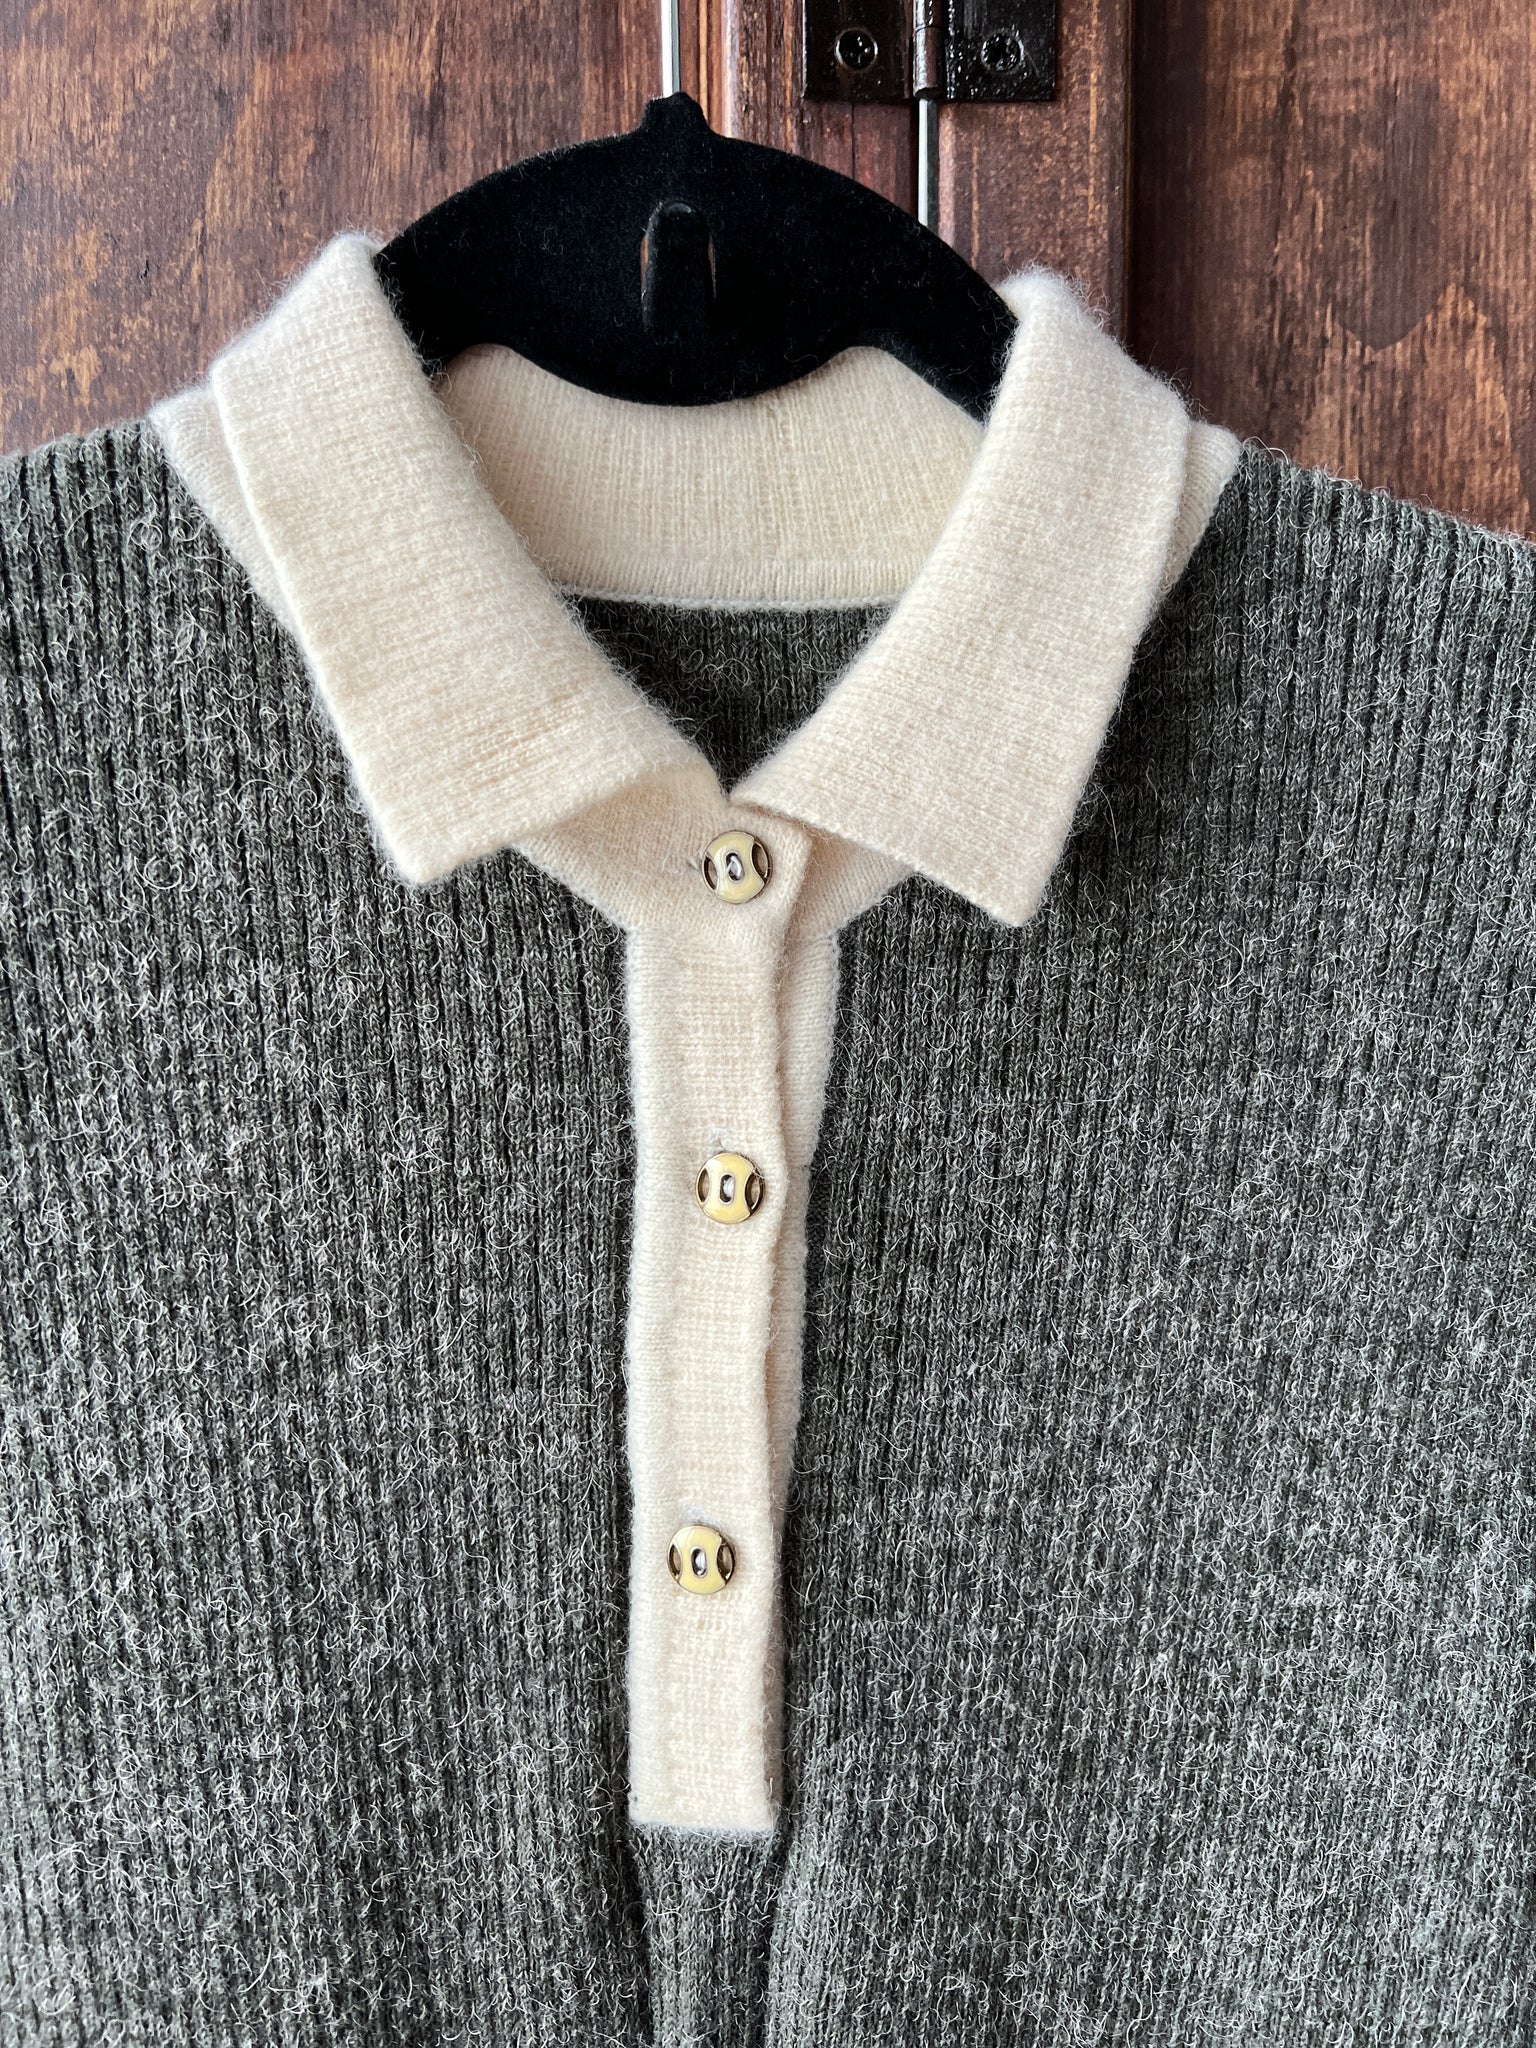 1990s SWEATER- olive w/ cream collar/ buttons